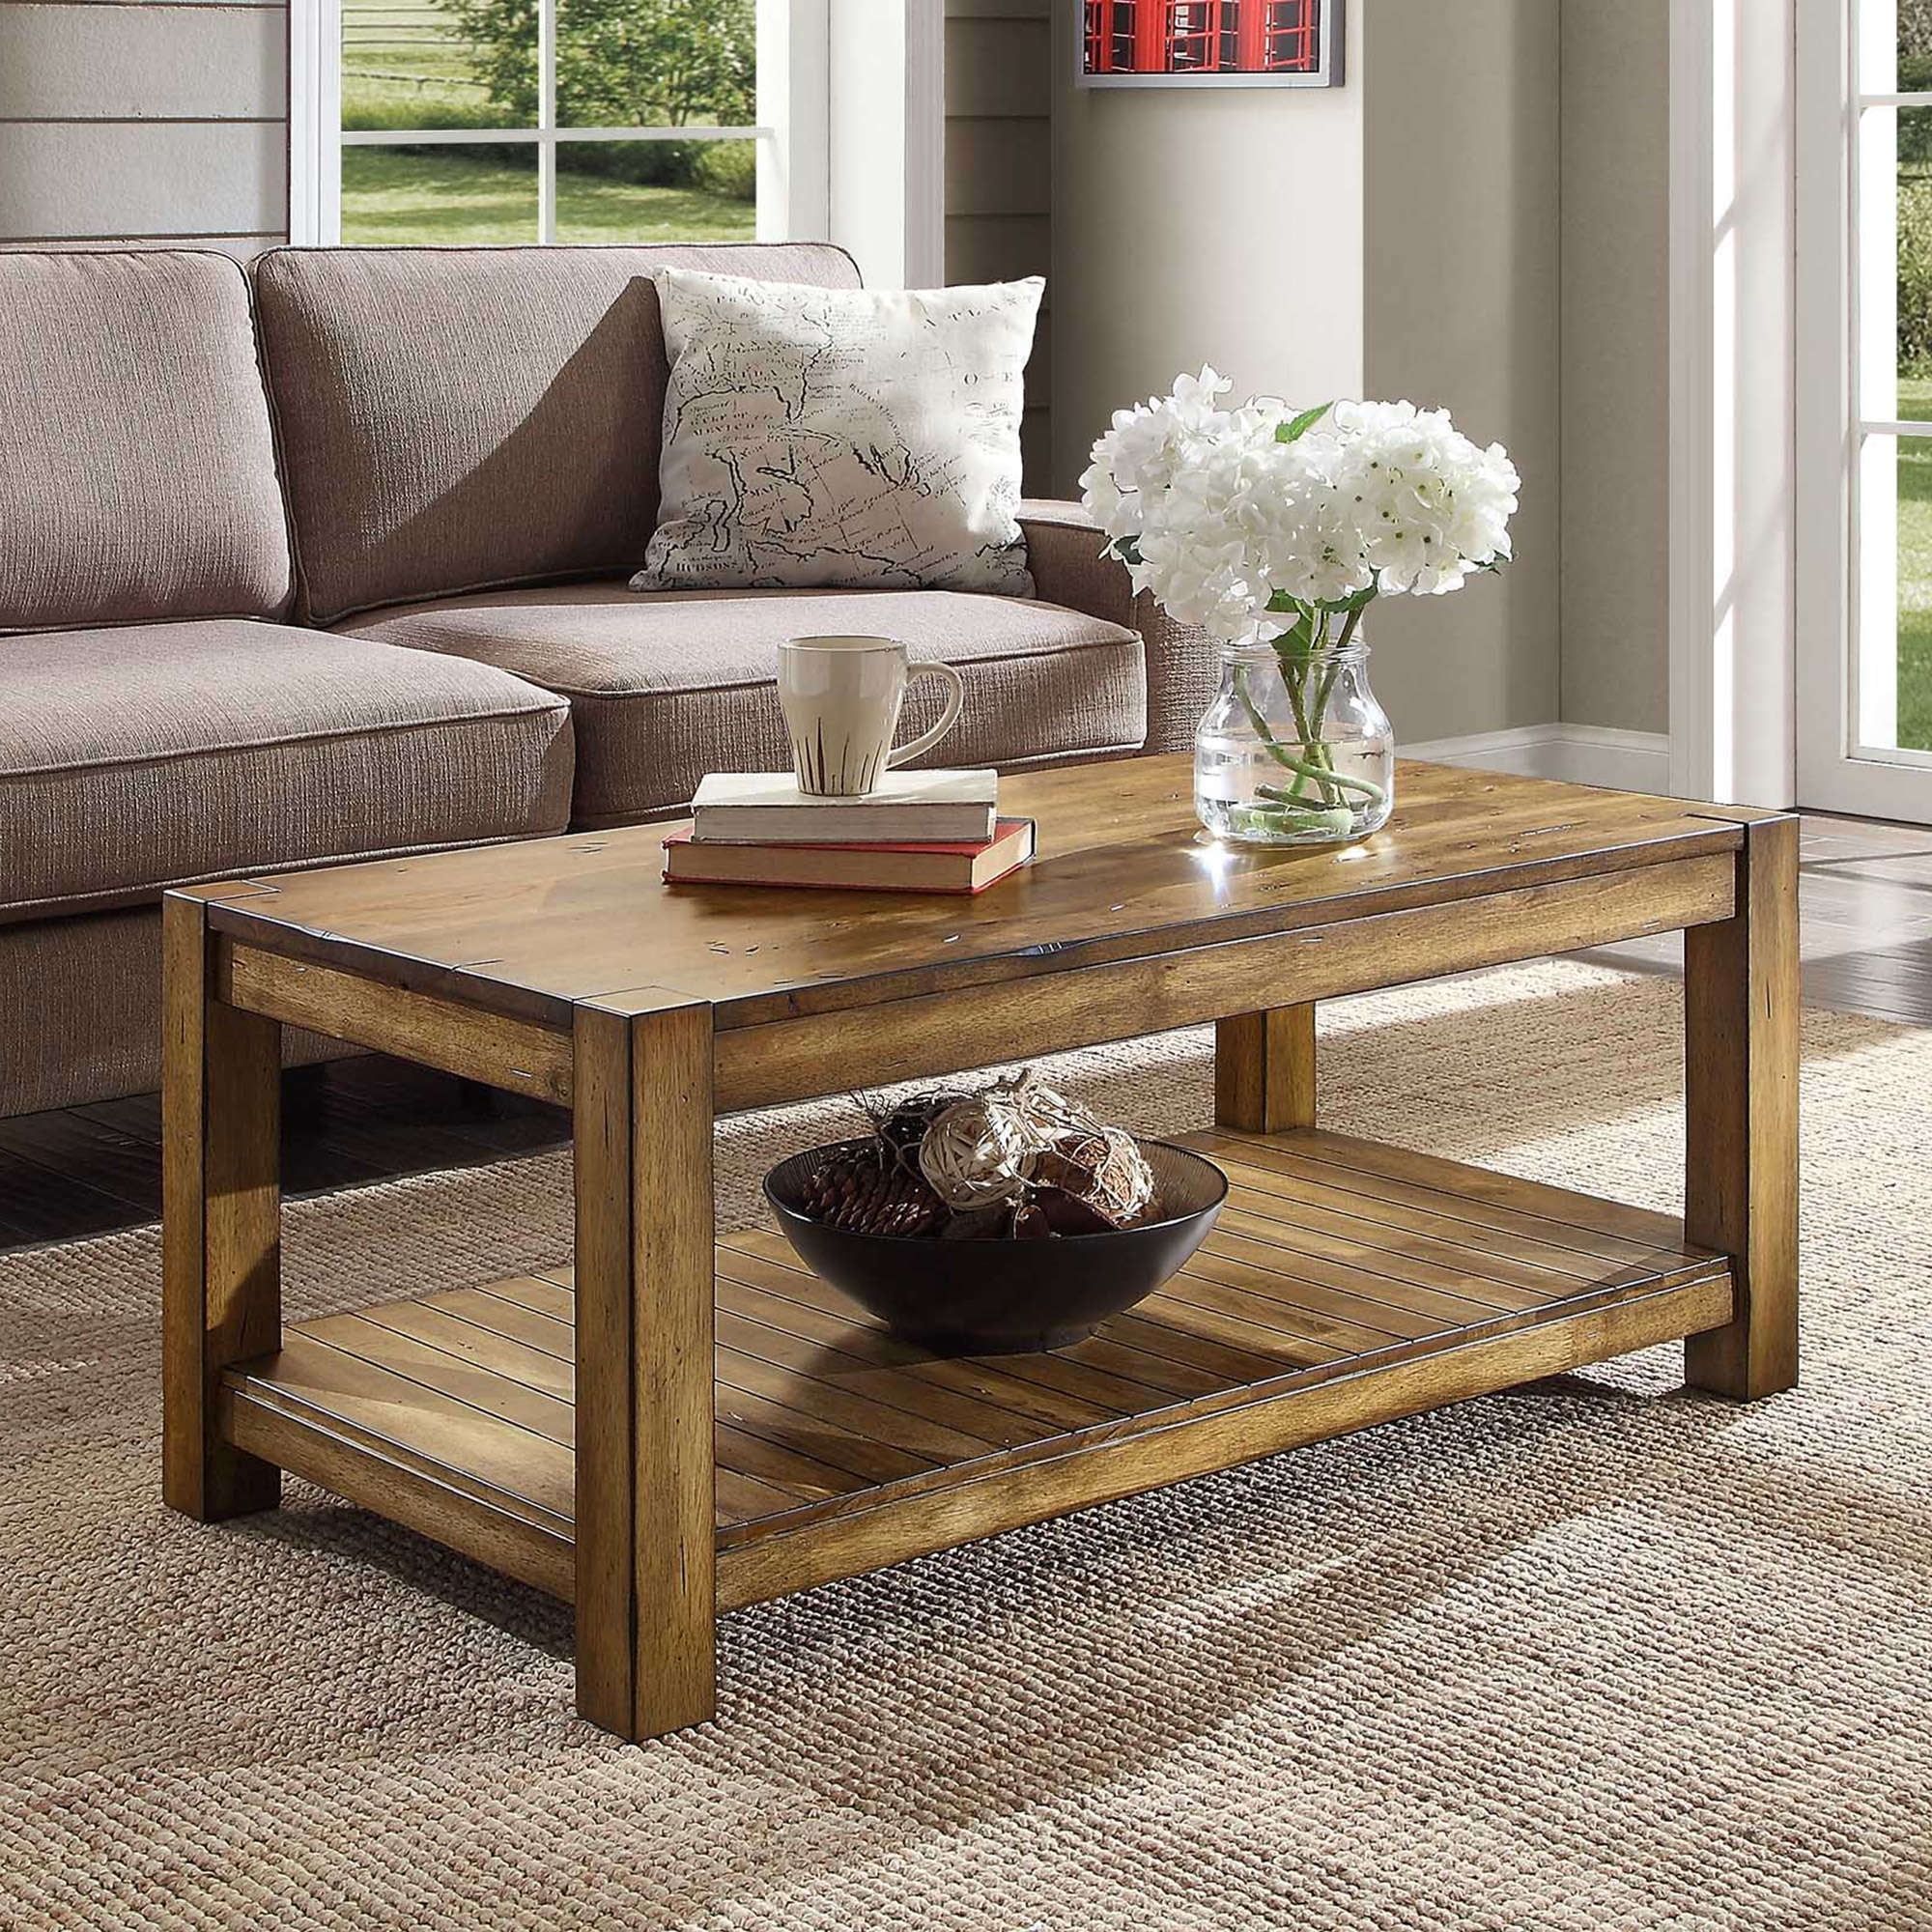 Better Homes & Gardens Bryant Solid Wood Coffee Table, Rustic Maple With Regard To Rustic Coffee Tables (View 13 of 15)